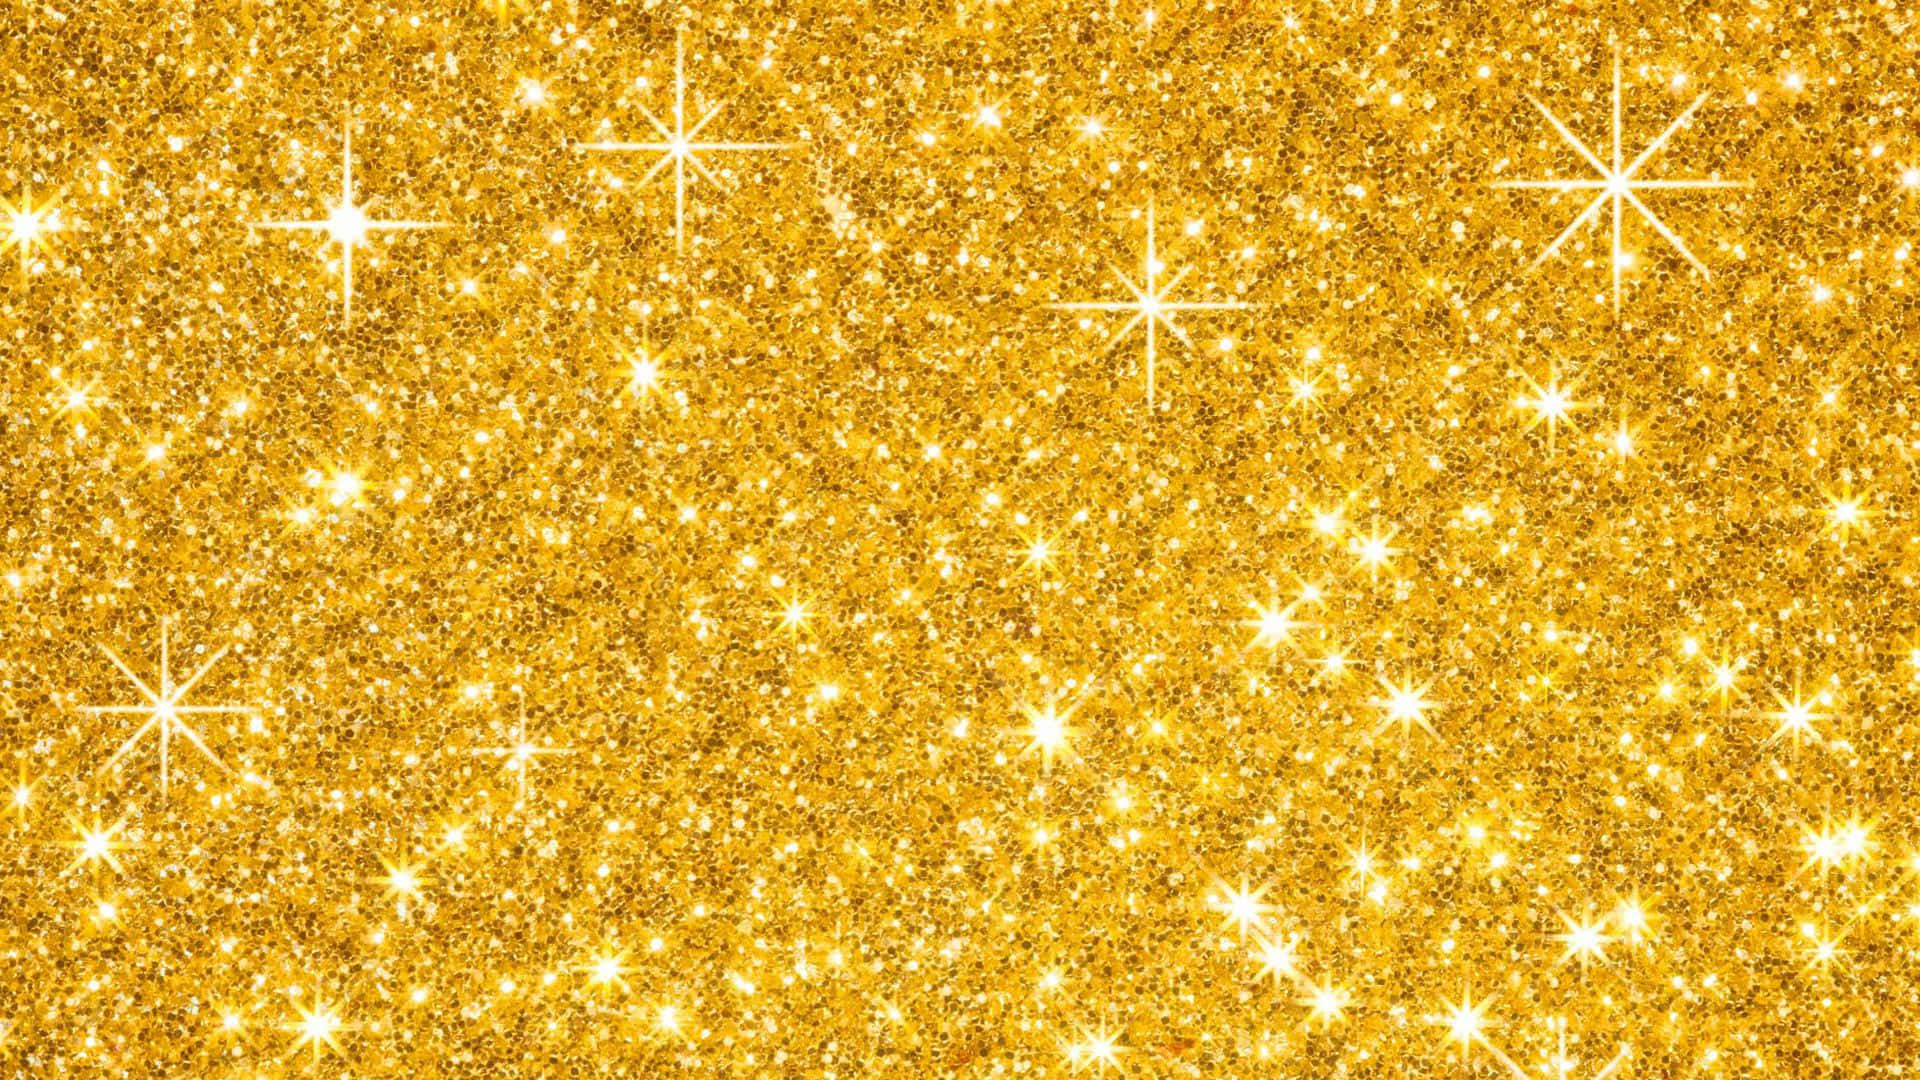 Add a spark of life to your world with this vibrant yellow glitter background